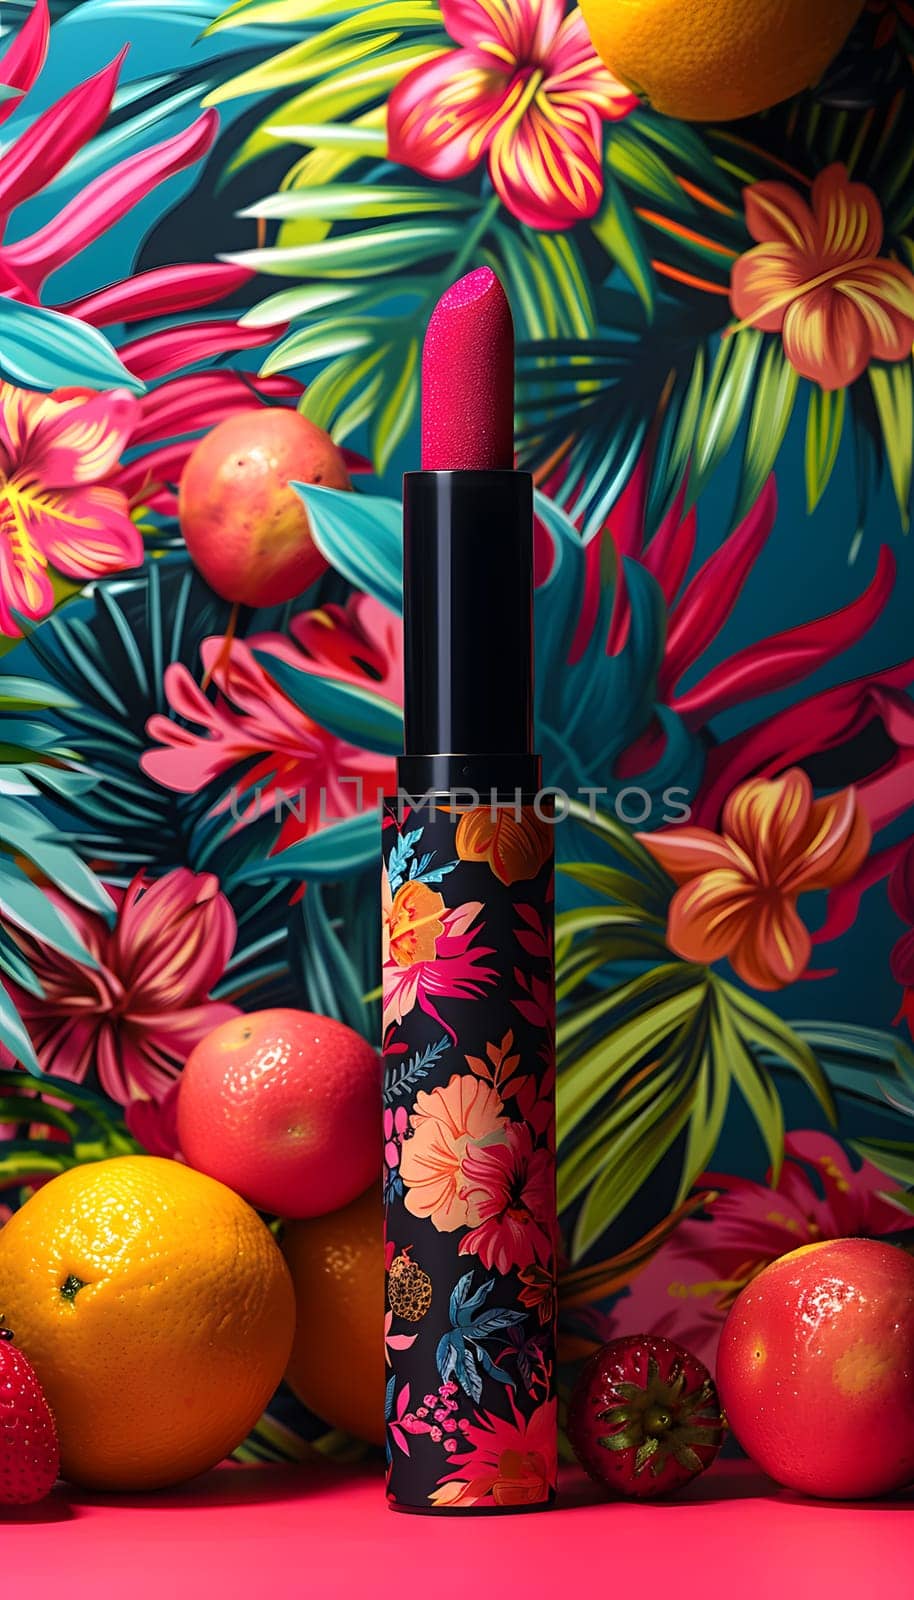 Pink lipstick displayed against vibrant floral backdrop by Nadtochiy